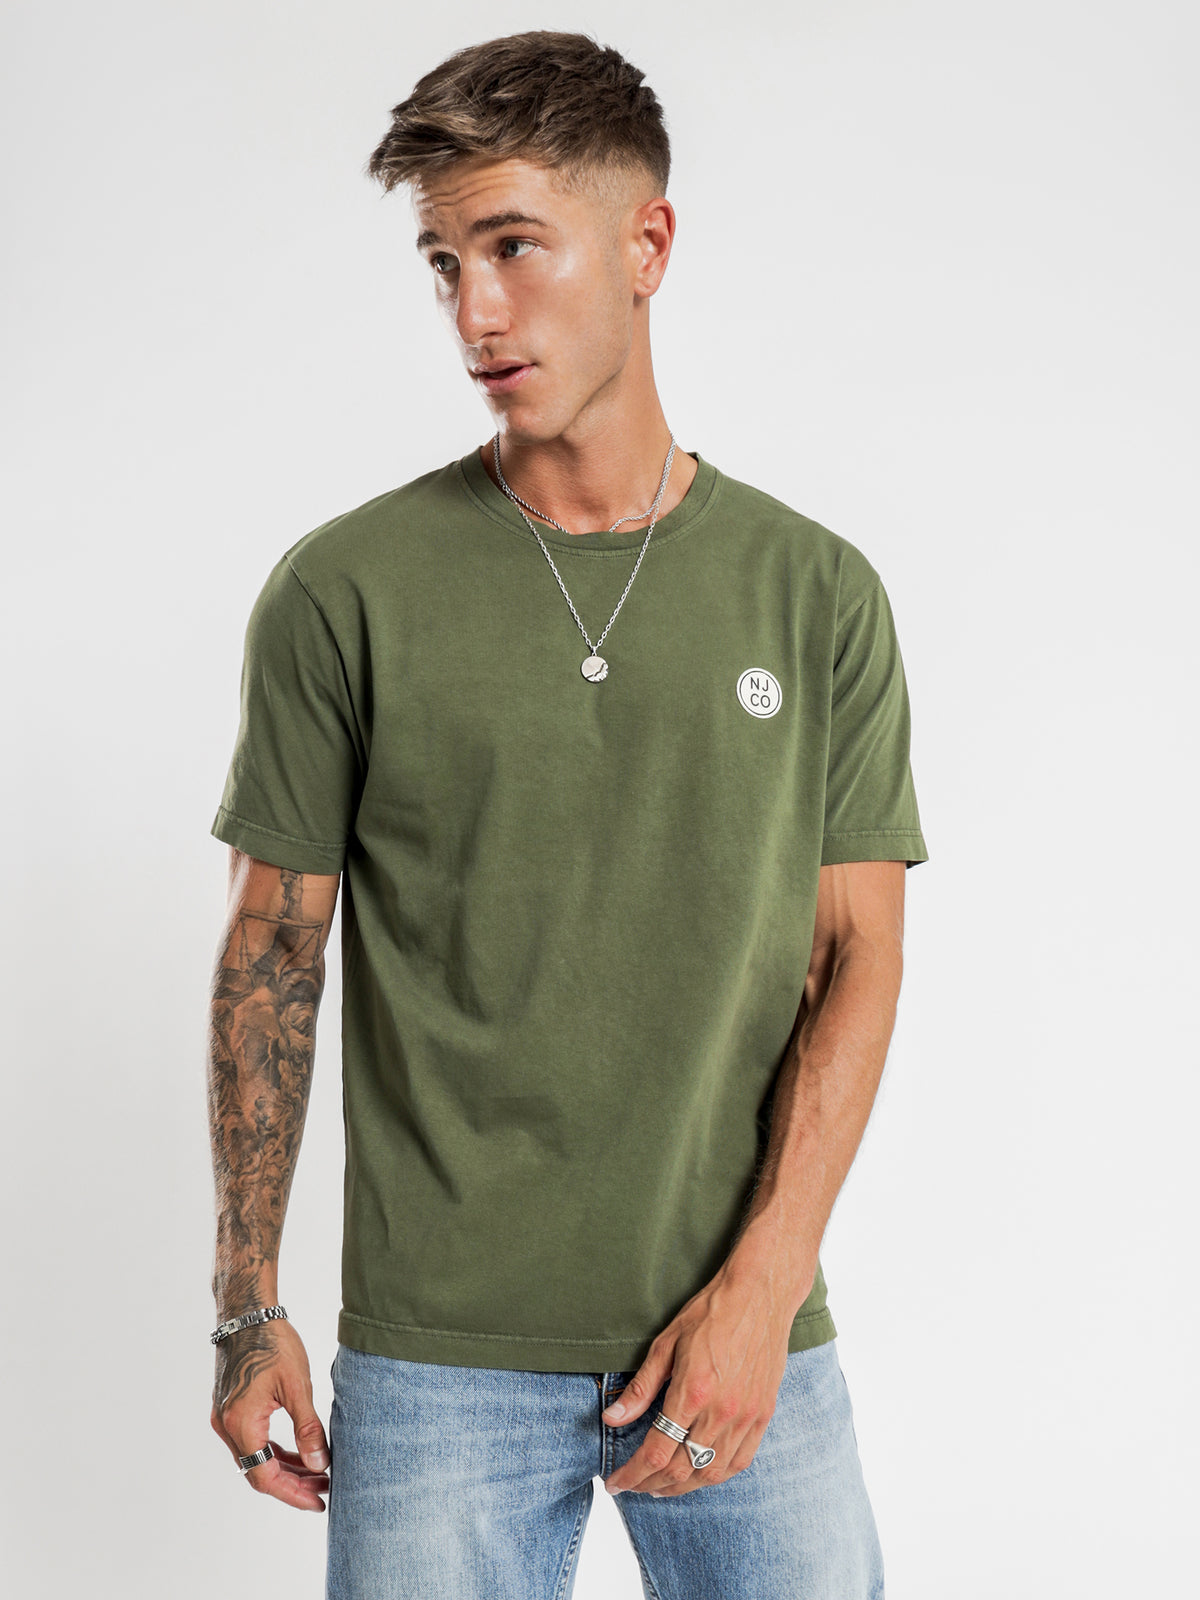 Uno Njco Circle T-Shirt in Olive